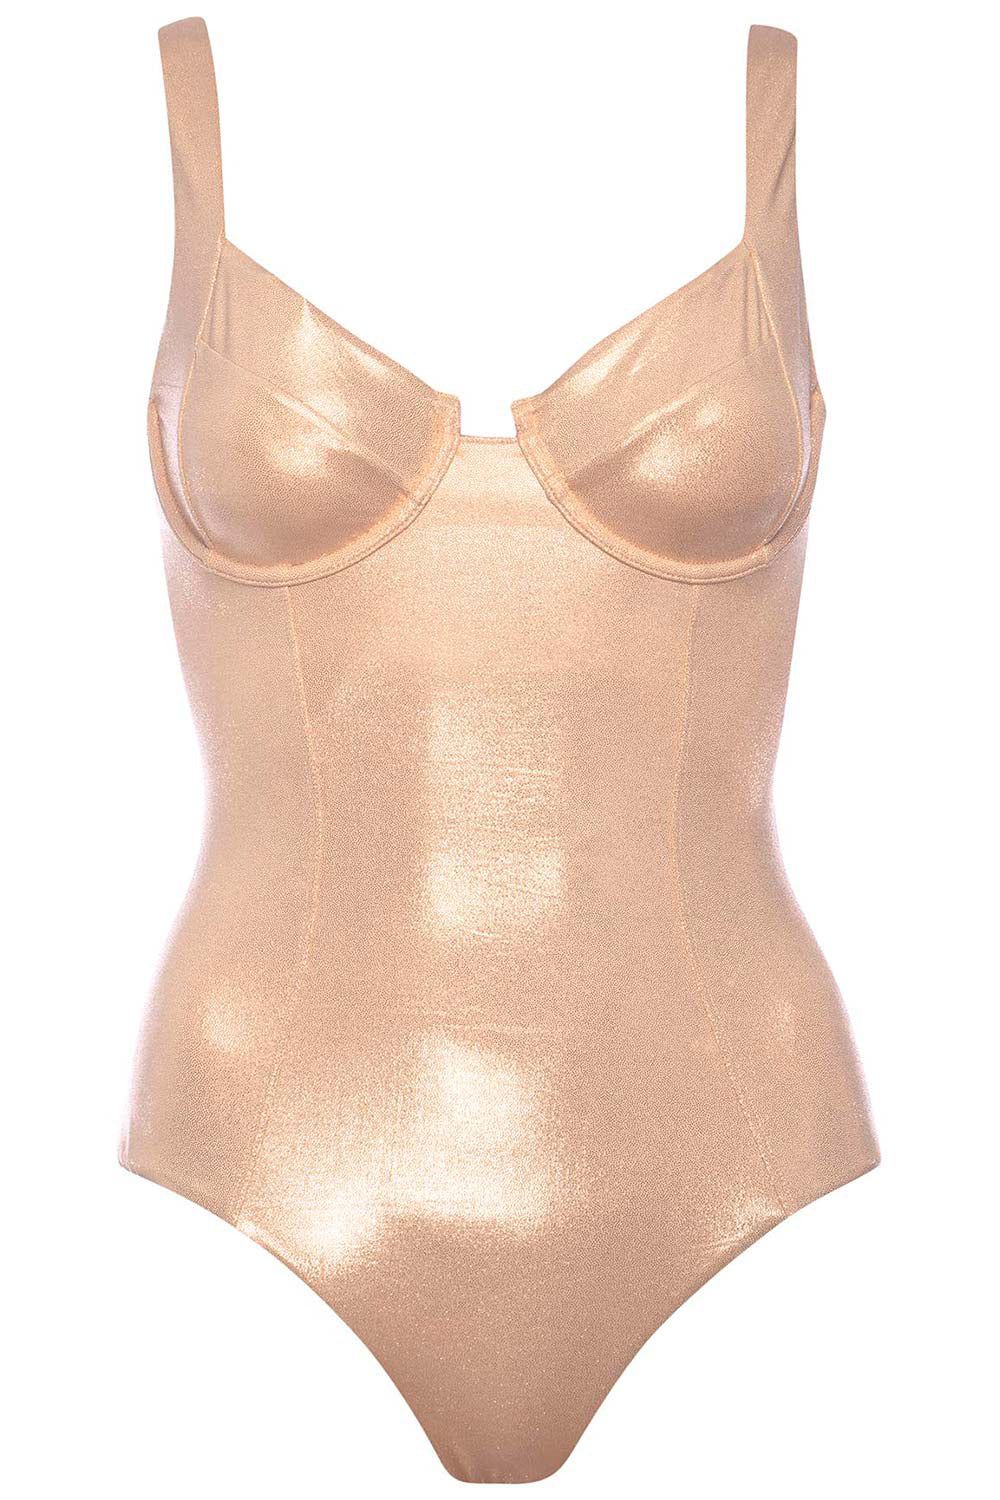 Carmel Underwire Gold Swimsuit | VETCHY